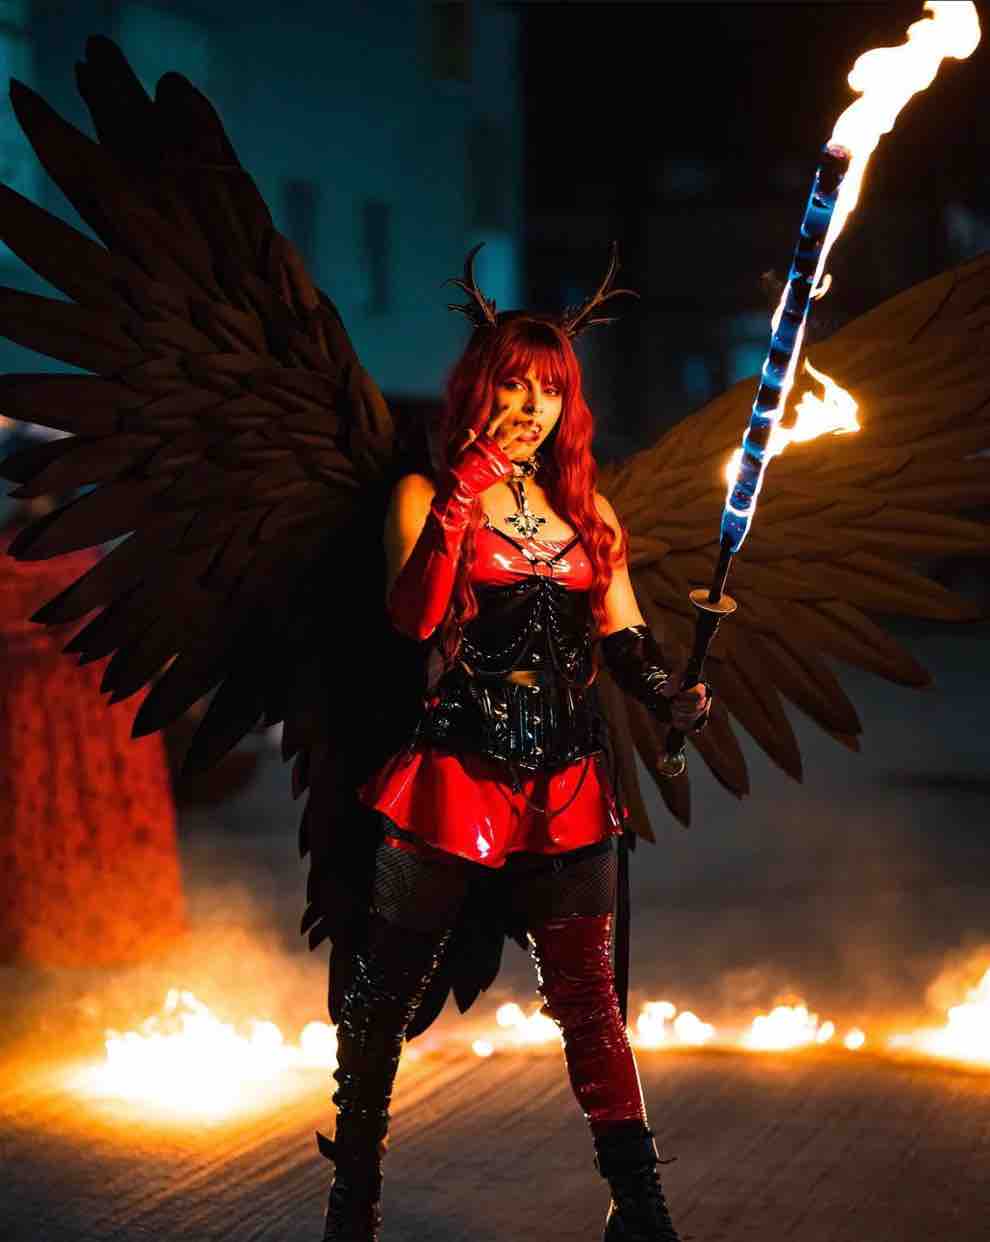 A cosplayer with large black wings and horns wears the Black Patent PVC Longline Underbust Corset - Hourglass over a red pvc dress and holds a burning sword.